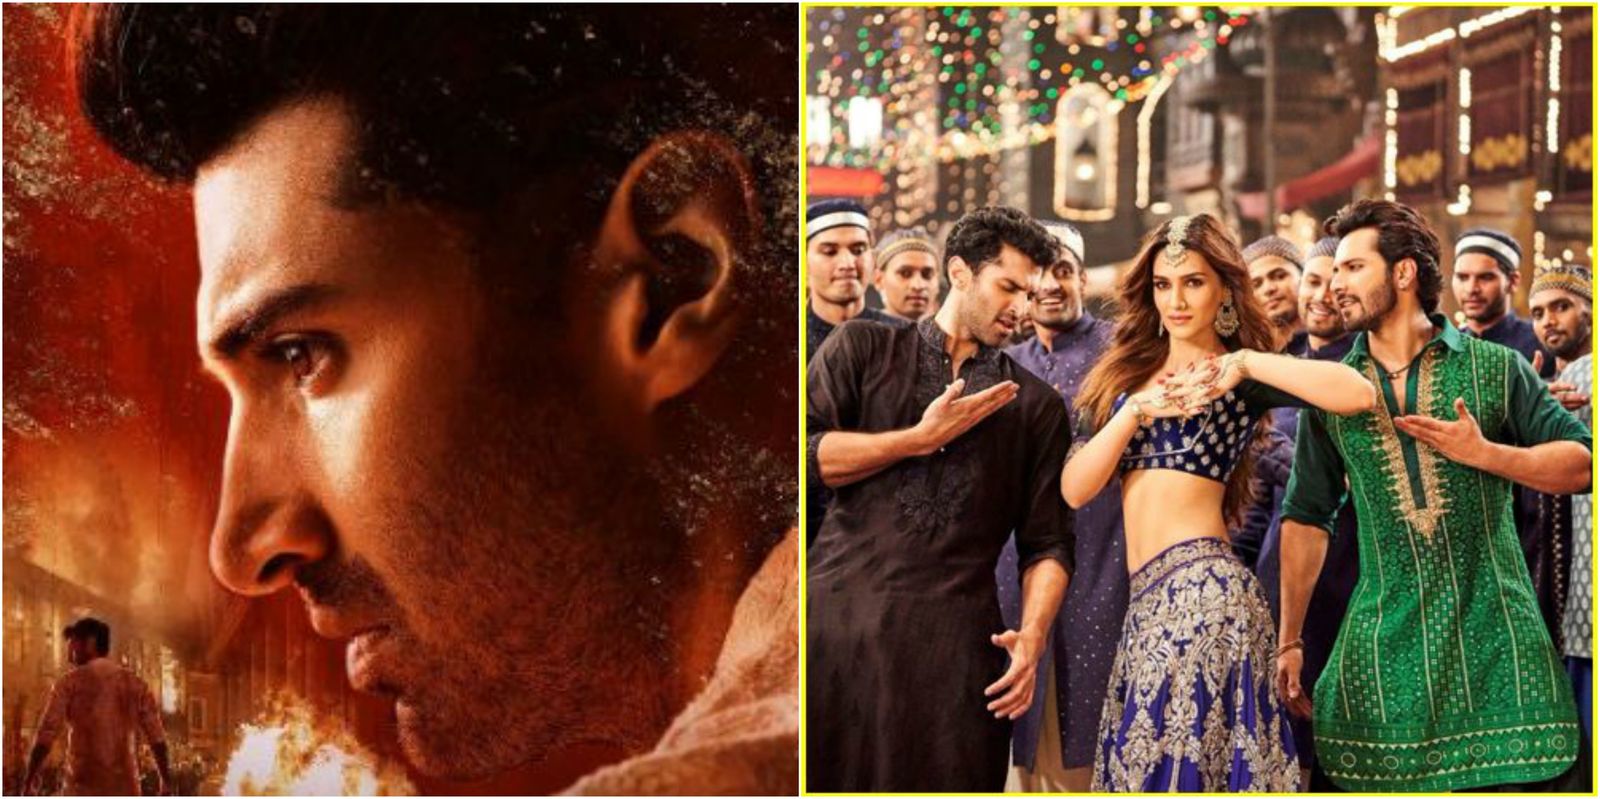 Aditya Roy Kapoor Is So Good In Kalank That You Might Want To Watch The Film Just For Him